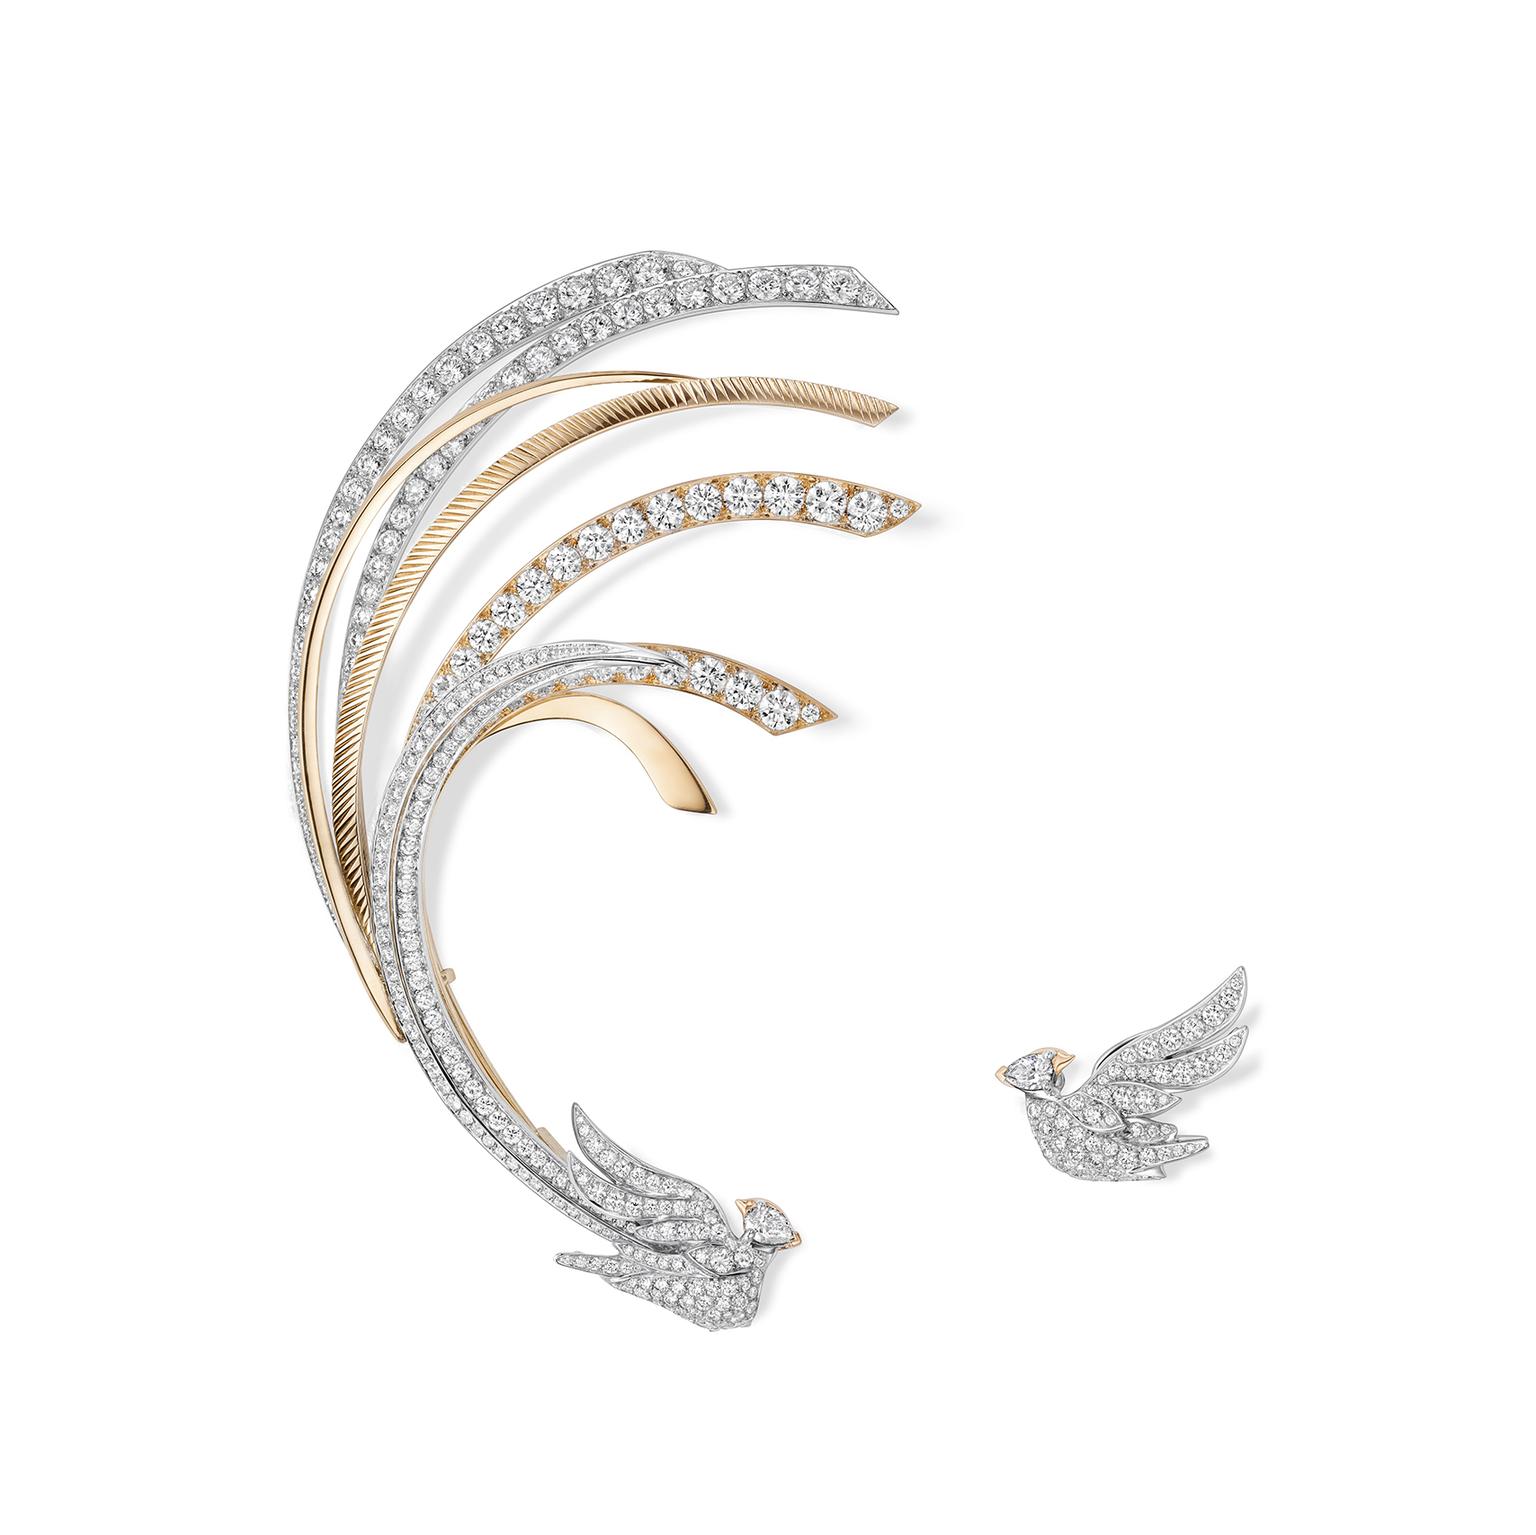 Parade Earcuff and earring by Chaumet